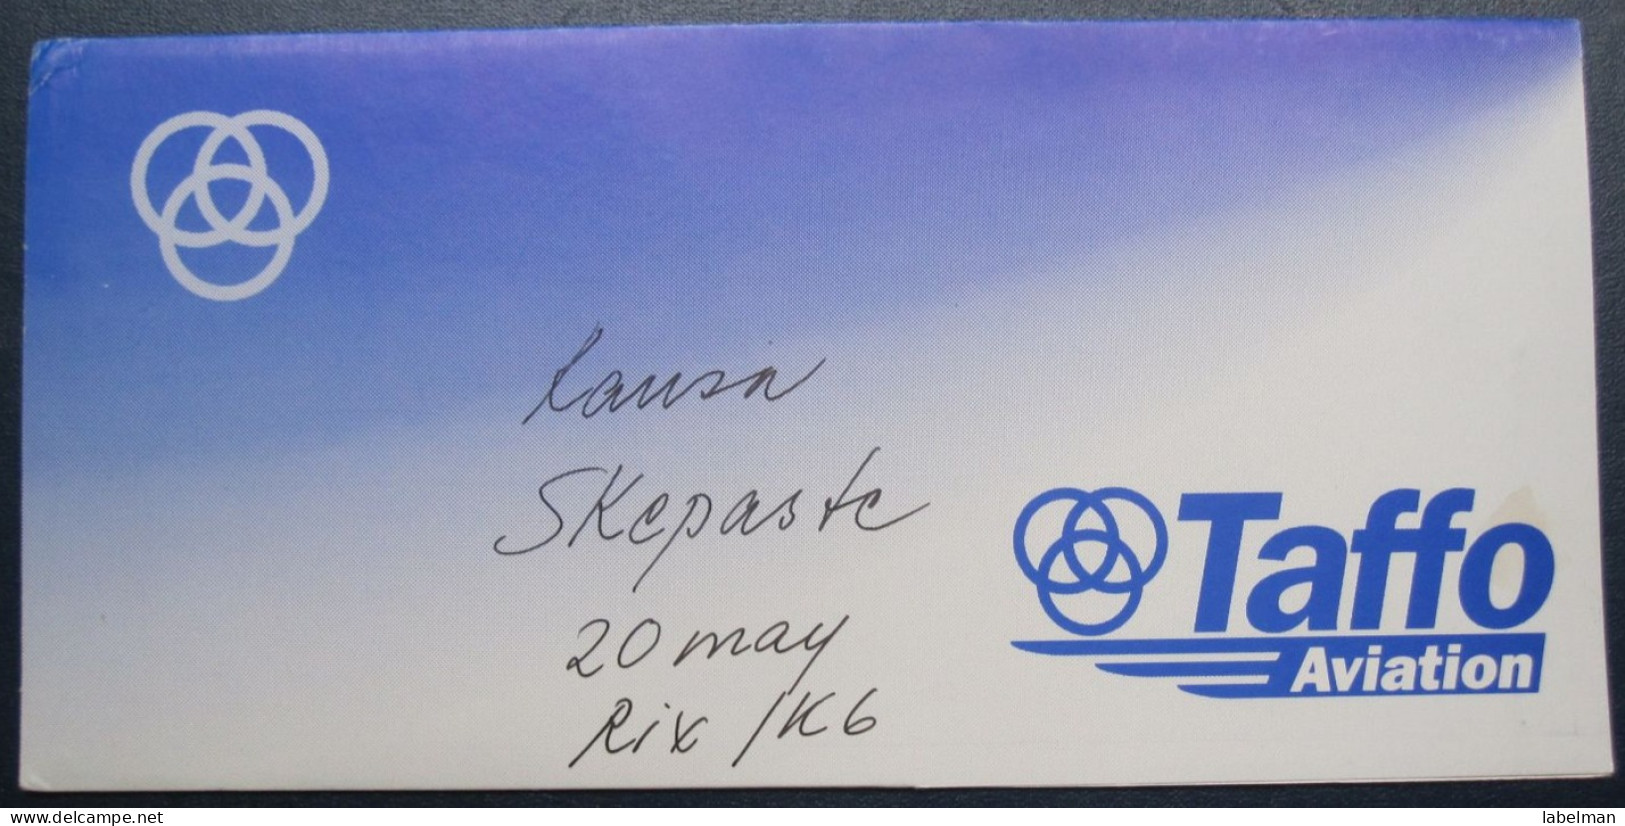 TAFFO AVIATION SWEDEN AIRWAYS AIRLINE TICKET HOLDER BOOKLET VIP TAG LUGGAGE BAGGAGE PLANE AIRCRAFT AIRPORT - Wereld